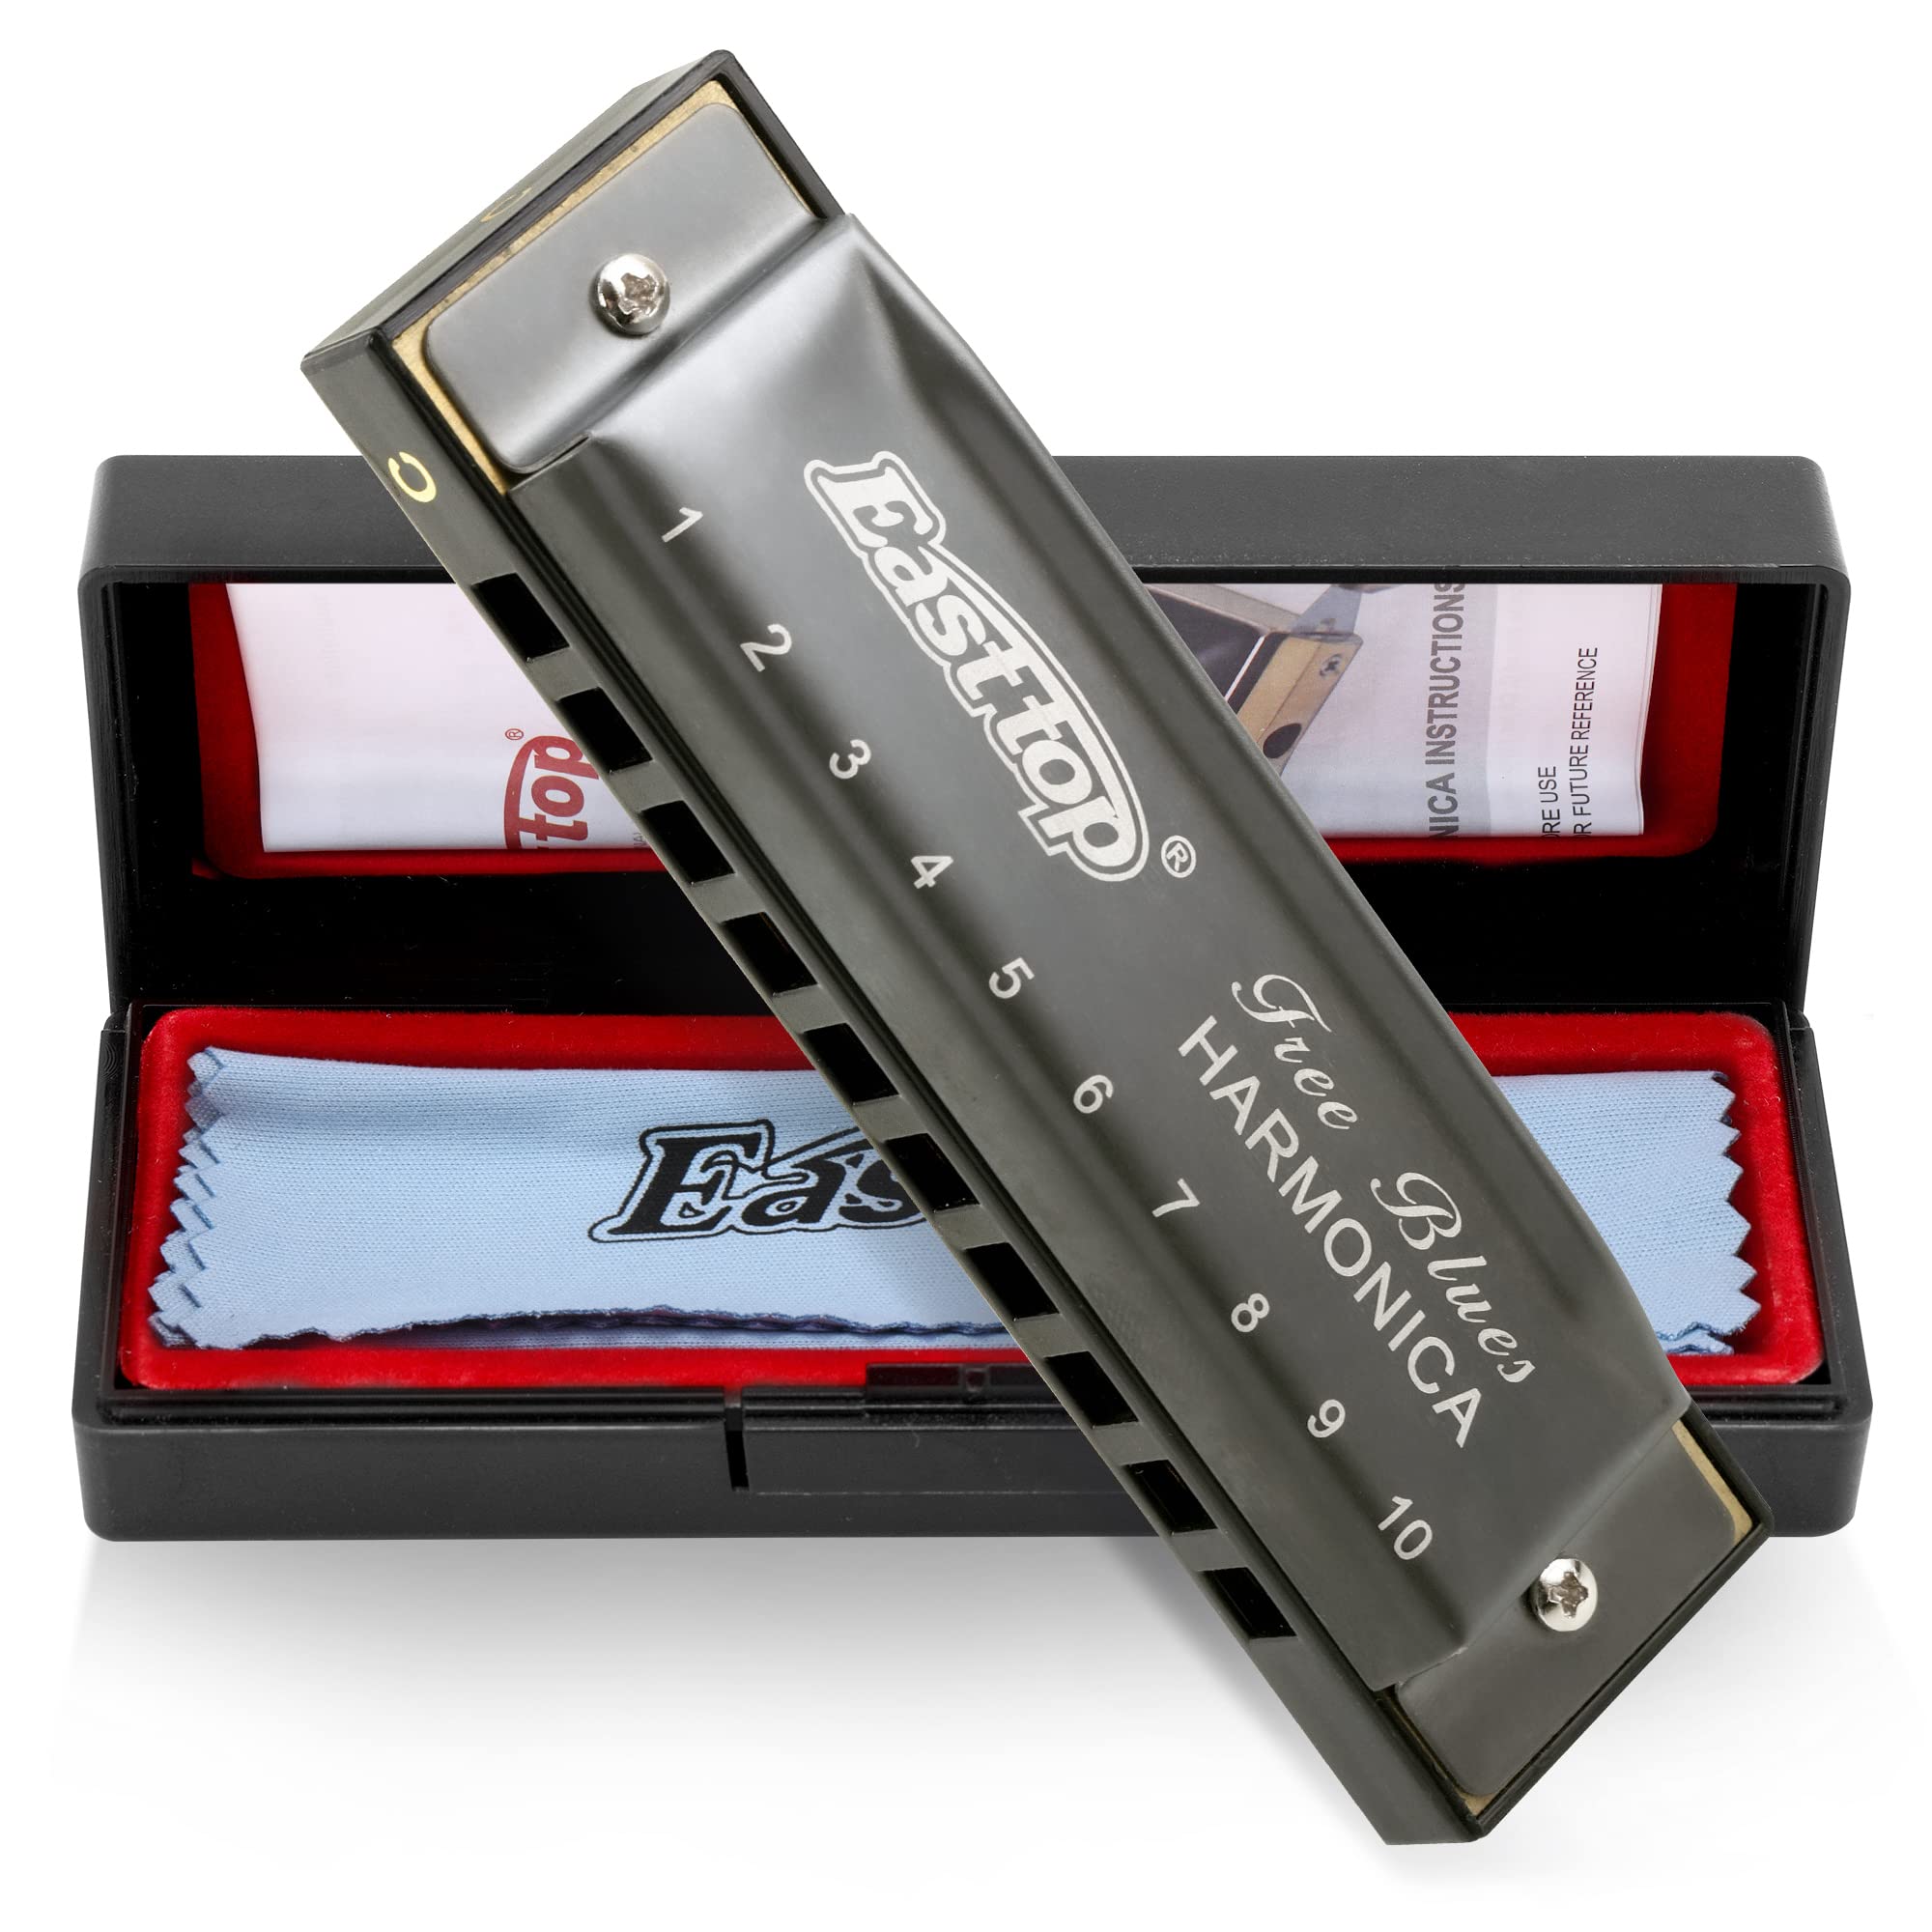 East top Blues Harmonica 10 Holes 20 Tones Blues Harp Diatonic Mouth Organ Harmonica For Adults, Professional players and Students(T003) - Easttop harmonica